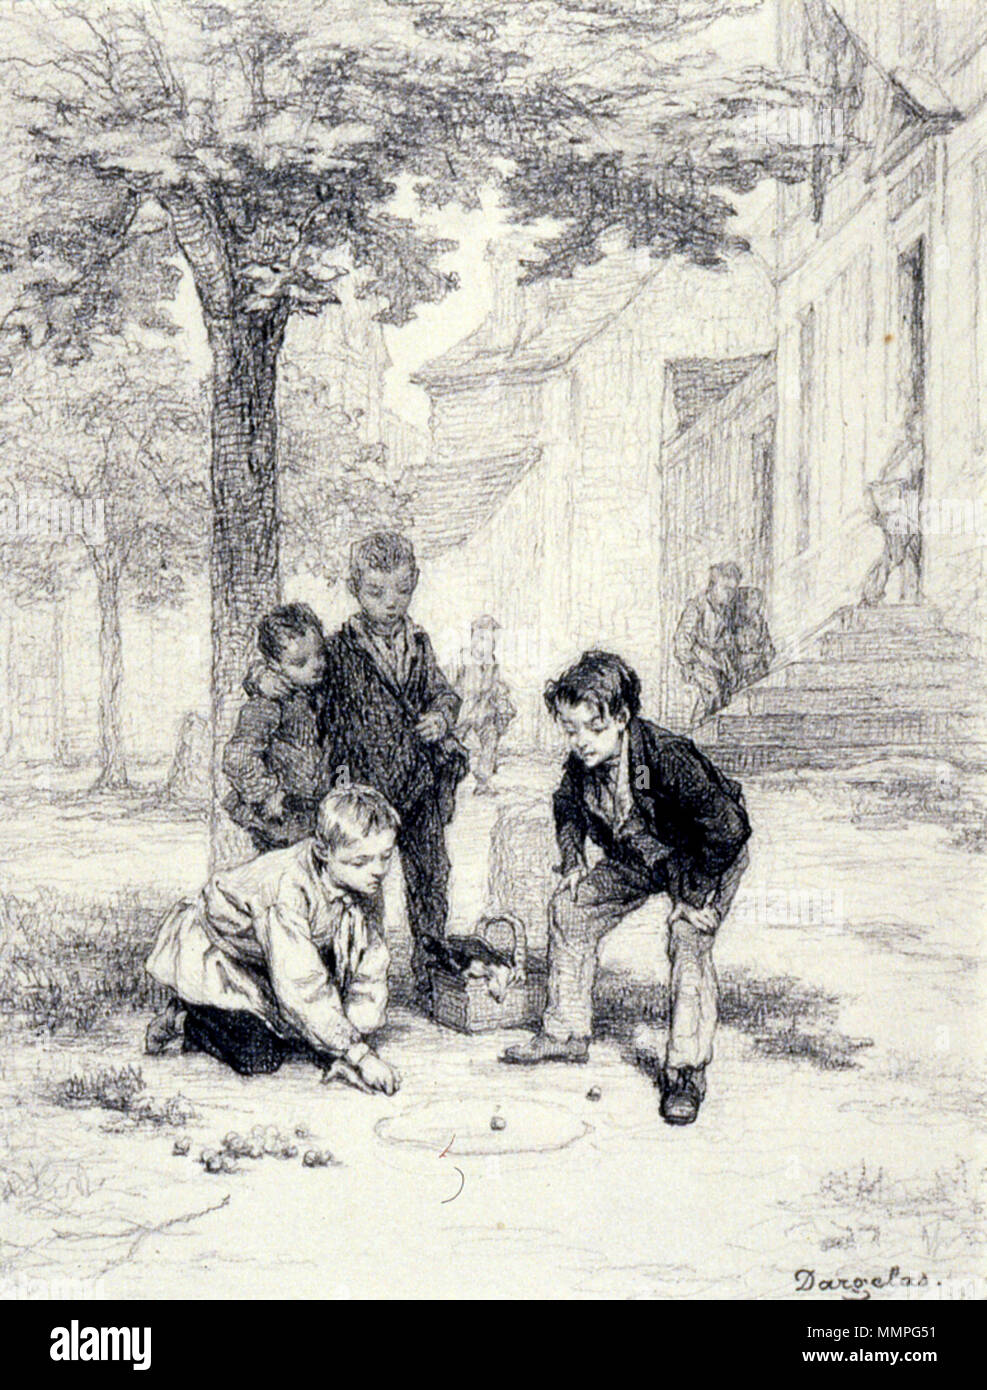 37.1636 André-Henri Dargelas (French, 1828-1906). 'Boys Playing Marbles,' ca. 1860. graphite on slightly textured, moderately thick, cream laid paper. Walters Art Museum (37.1636): Acquired by William T. Walters. André-Henri Dargelas - Boys Playing Marbles - Walters 371636 Stock Photo